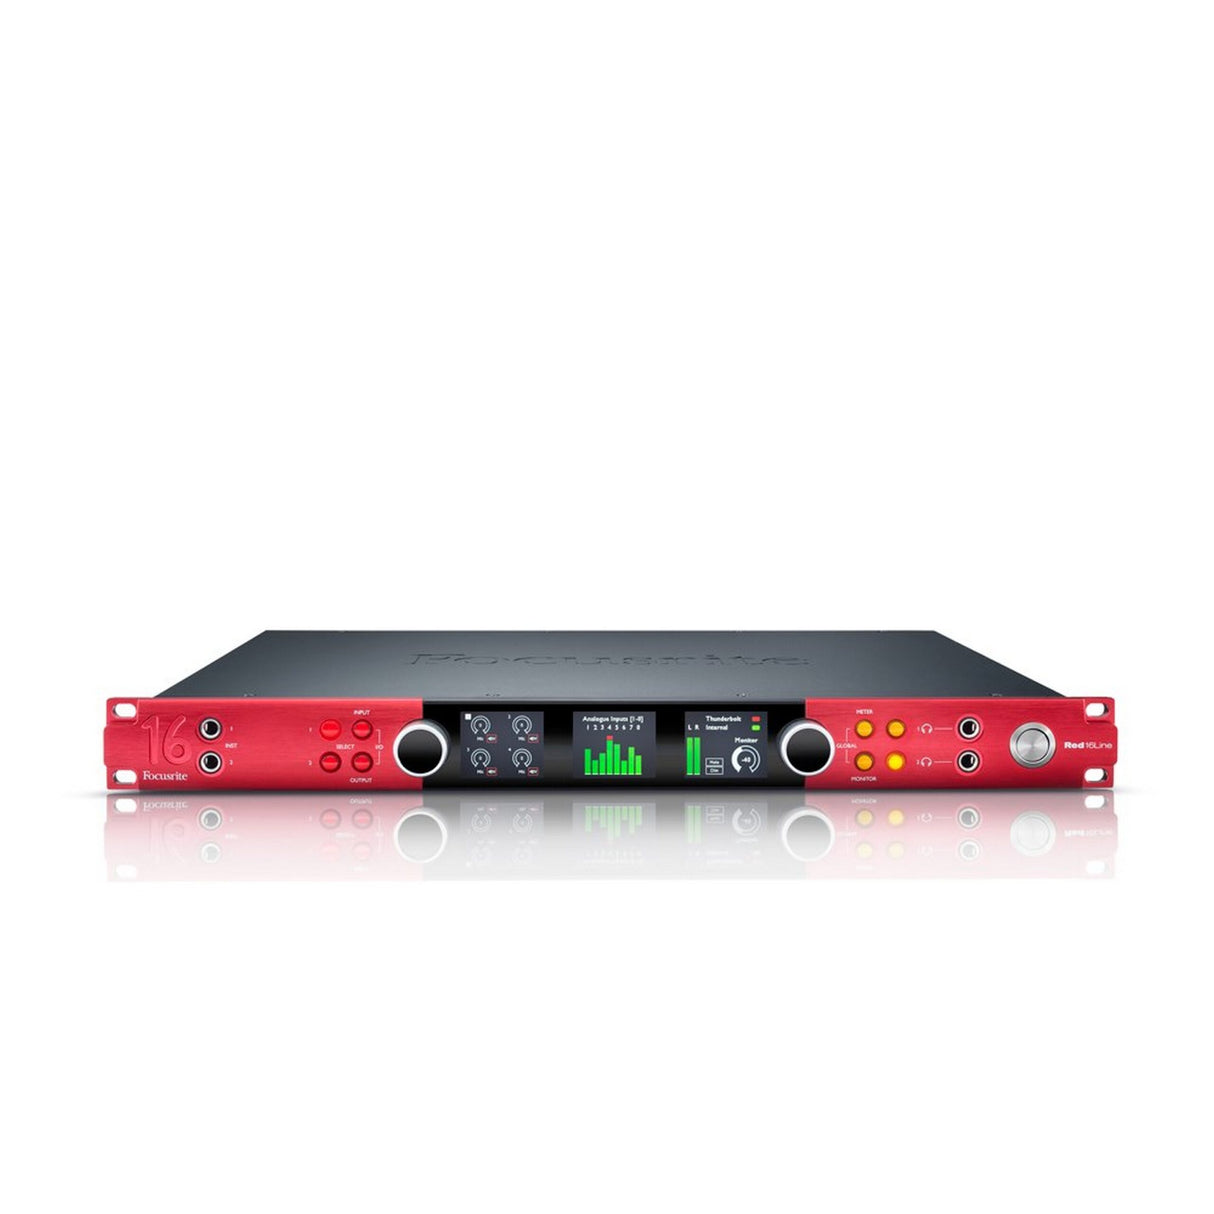 Focusrite Red 16Line 64 x 64 Thunderbolt 3 and Pro Tools|HD Interface with Dante